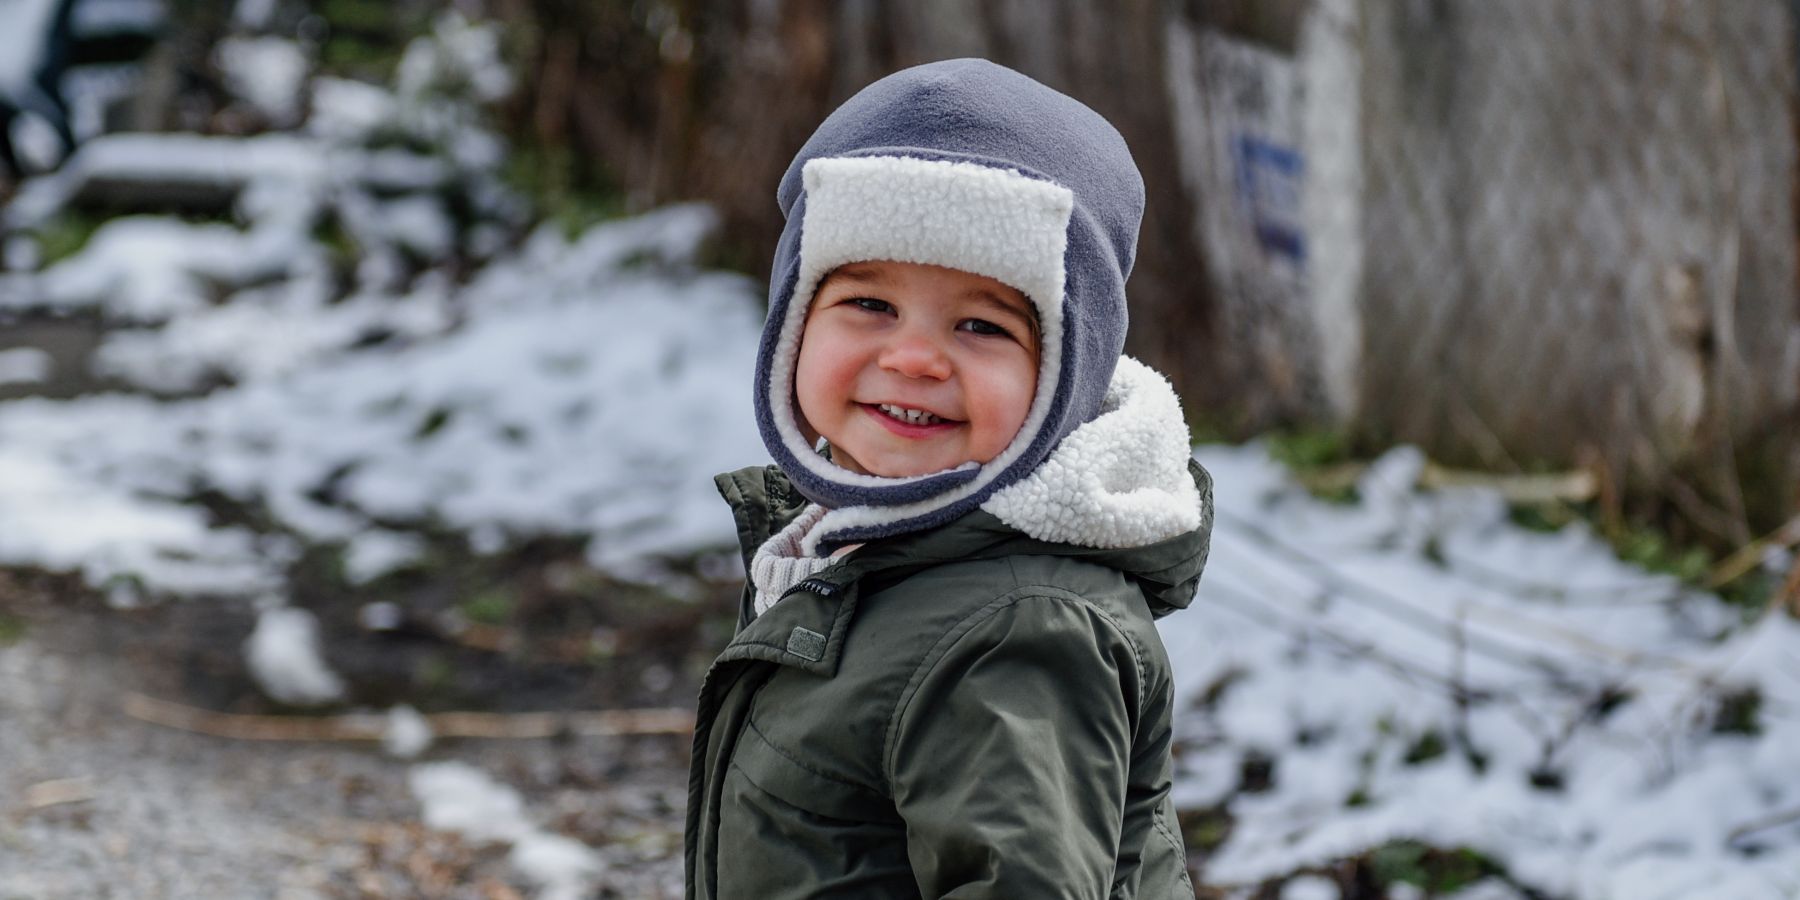 Polartec Fleece Hats and Neck Warmers.  Hats that will keep your kids warm and dry for an afternoon of tobogganing. Quick dry, machine washable. Made in Canada by Puffin Gear 